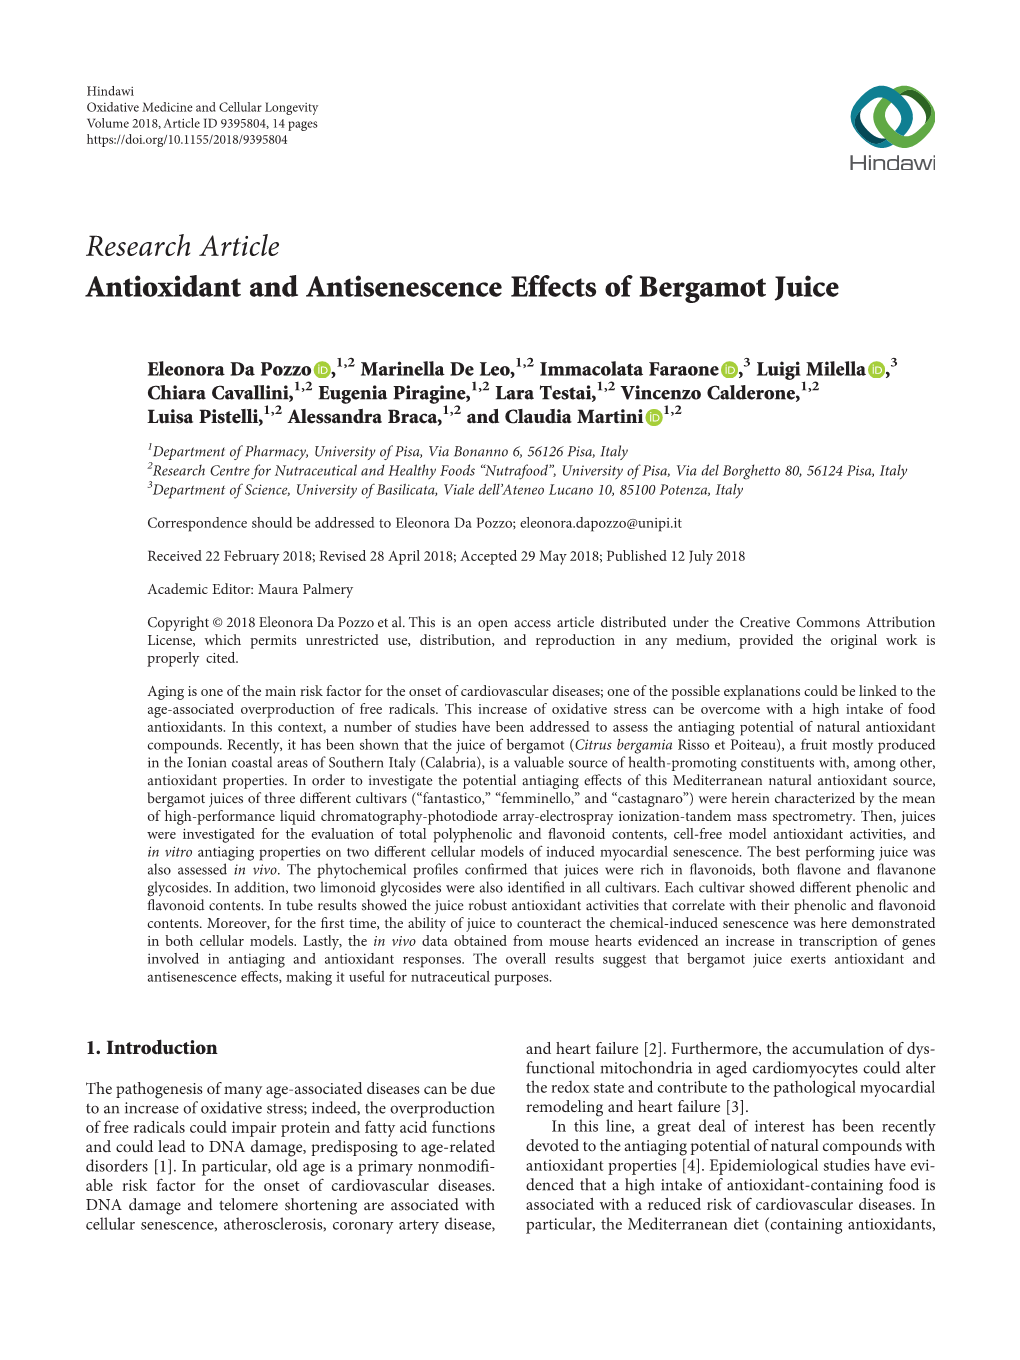 Research Article Antioxidant and Antisenescence Effects of Bergamot Juice